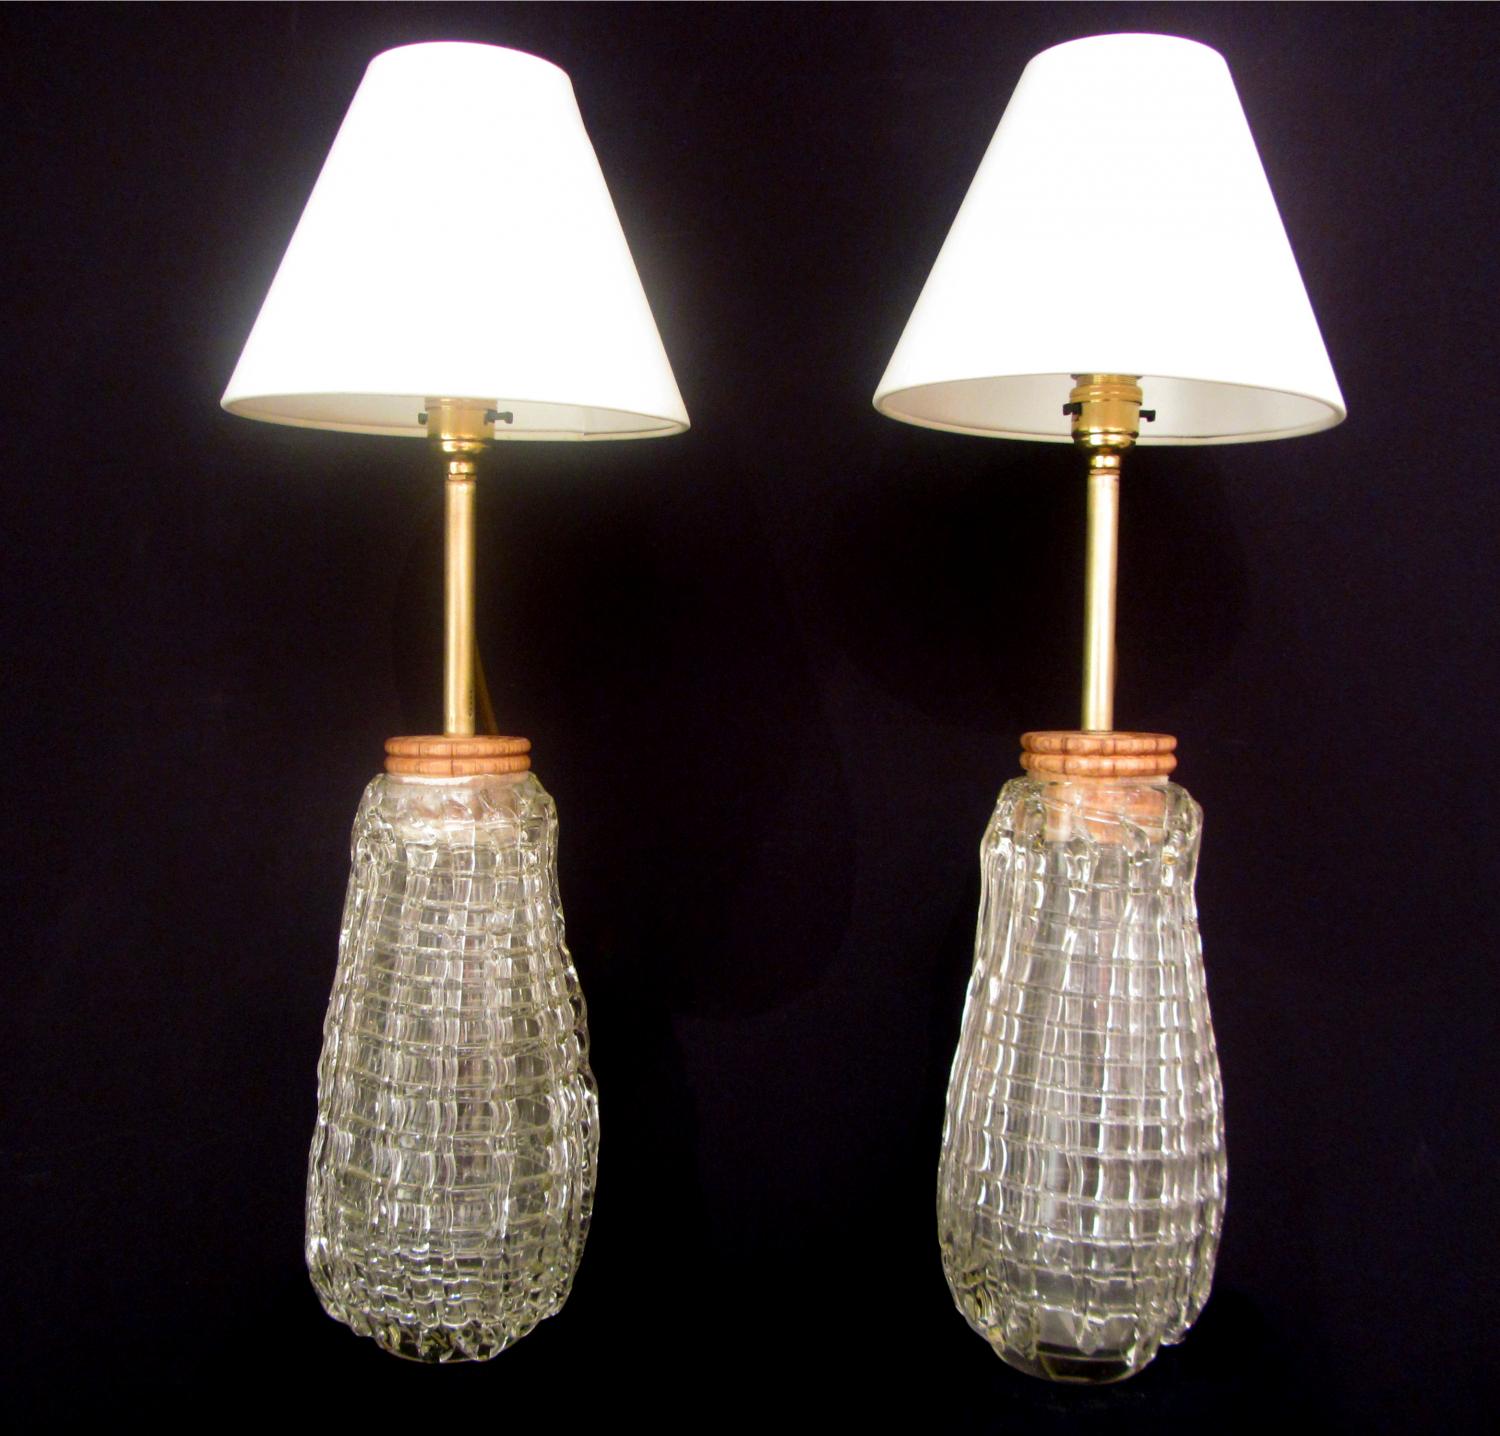 A pair of unusual glass lamps